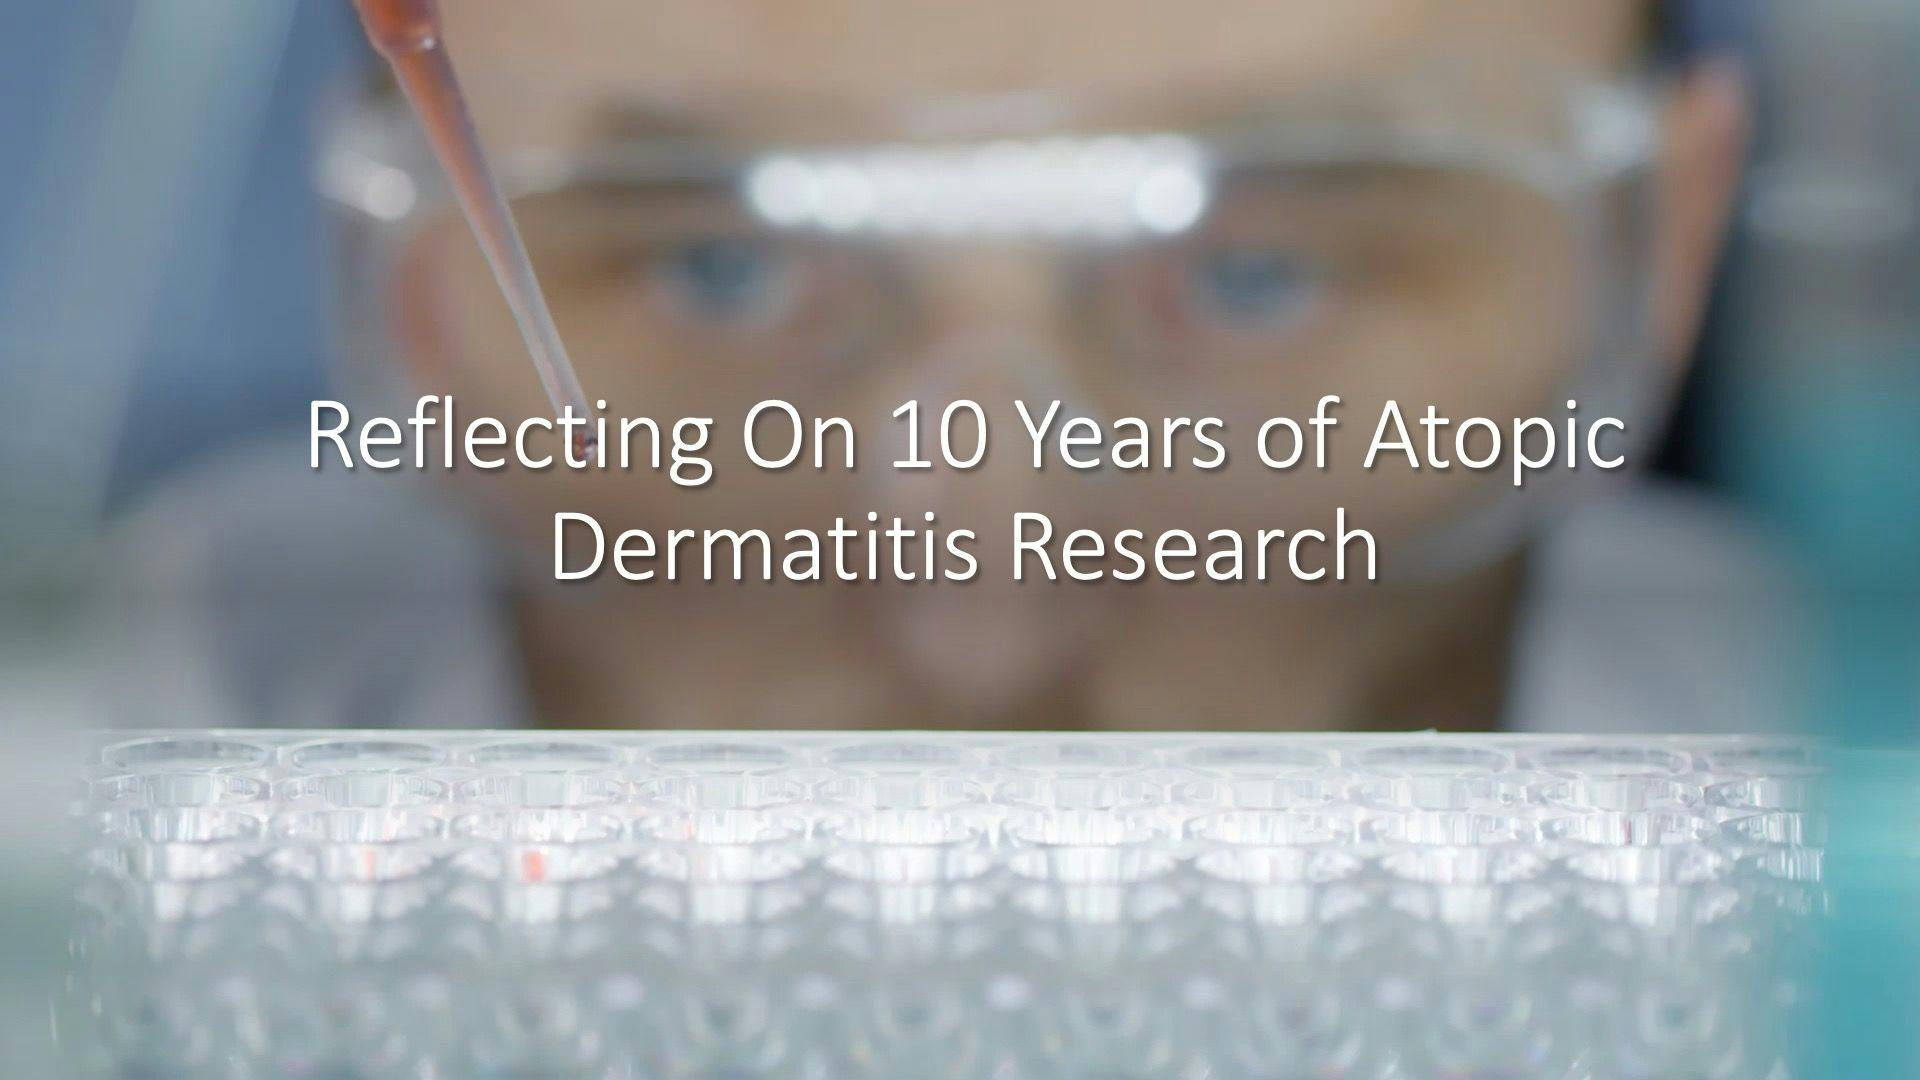 Reflecting On 10 Years of Atopic Dermatitis Research